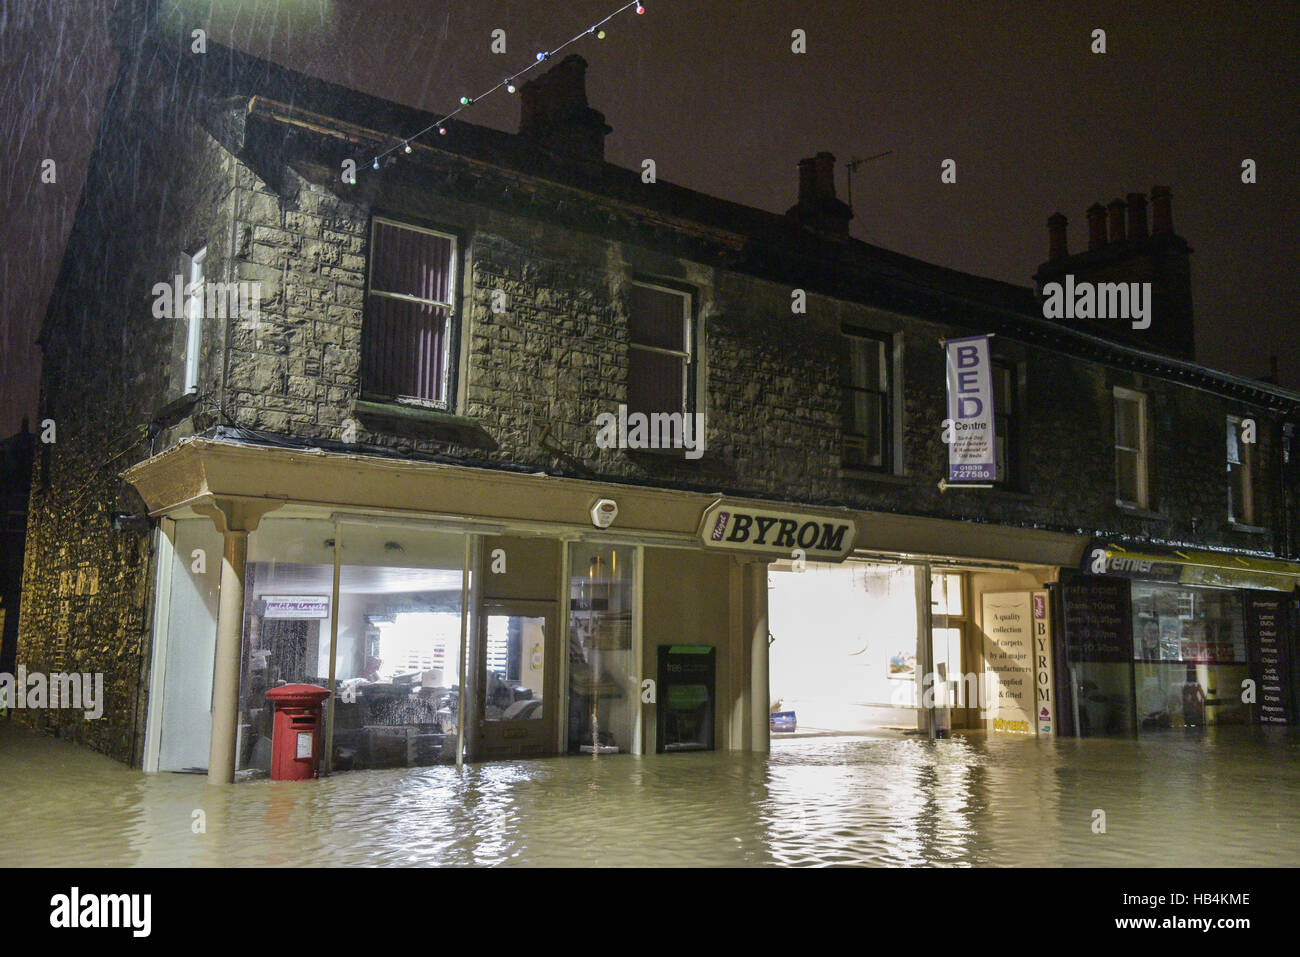 A row of shops and a post box flooded in Kendal, Cumbria in the early hours of the 6th of December 2015 after 36 hours of torrential rain. Stock Photo